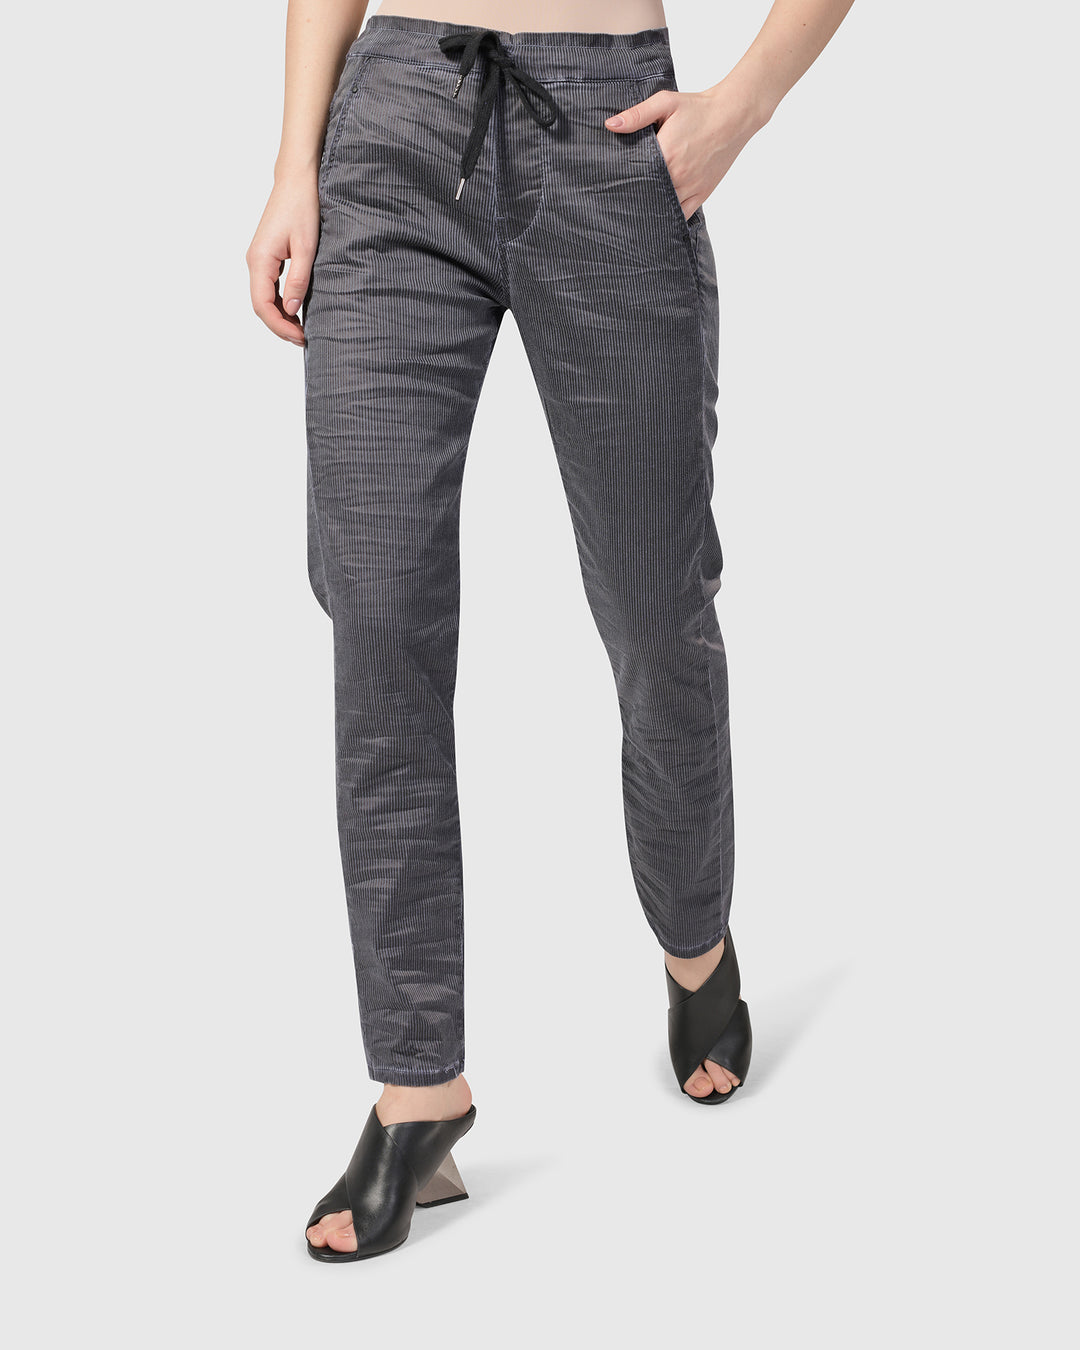 Pinstripe Iconic Stretch Jeans, Navy Wash